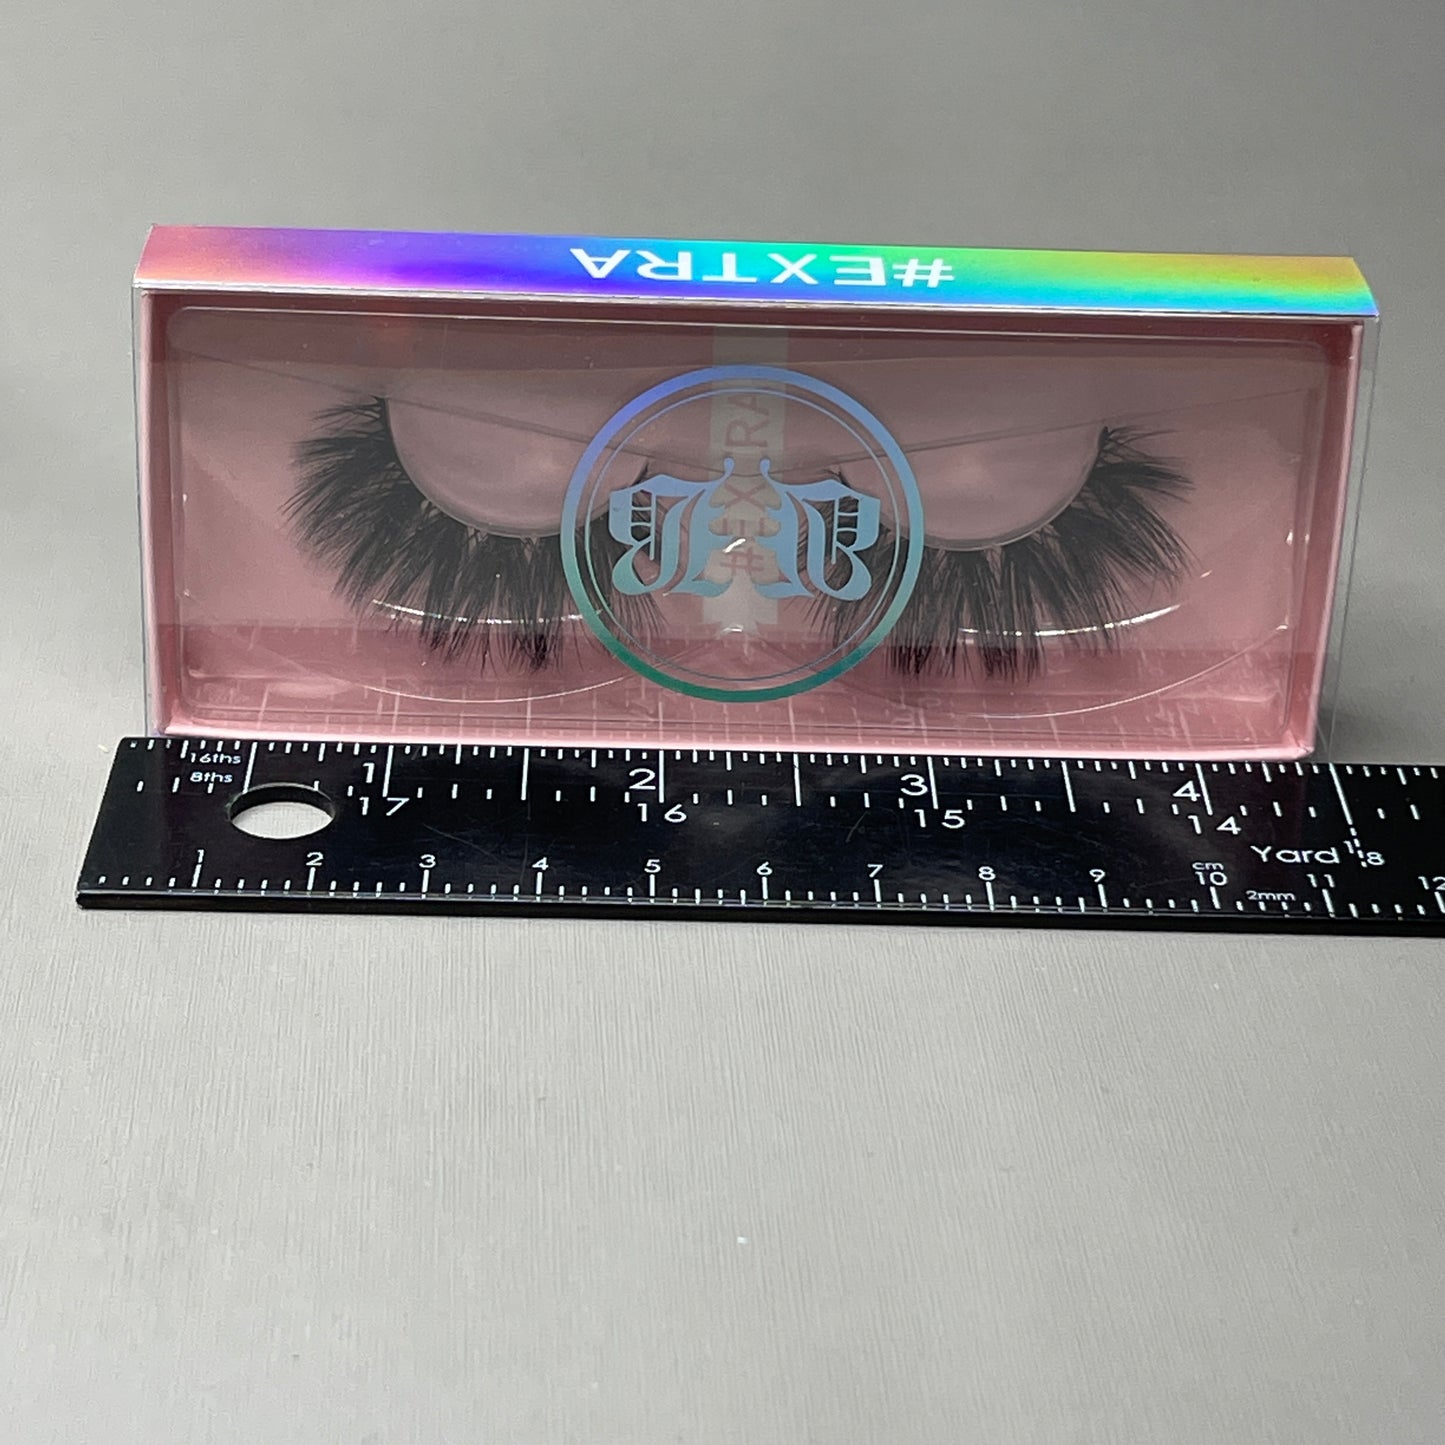 Baddie B Lashes Faux Mink Lashes # Extra  3D Mink Hair Reusable .5oz (NEW)